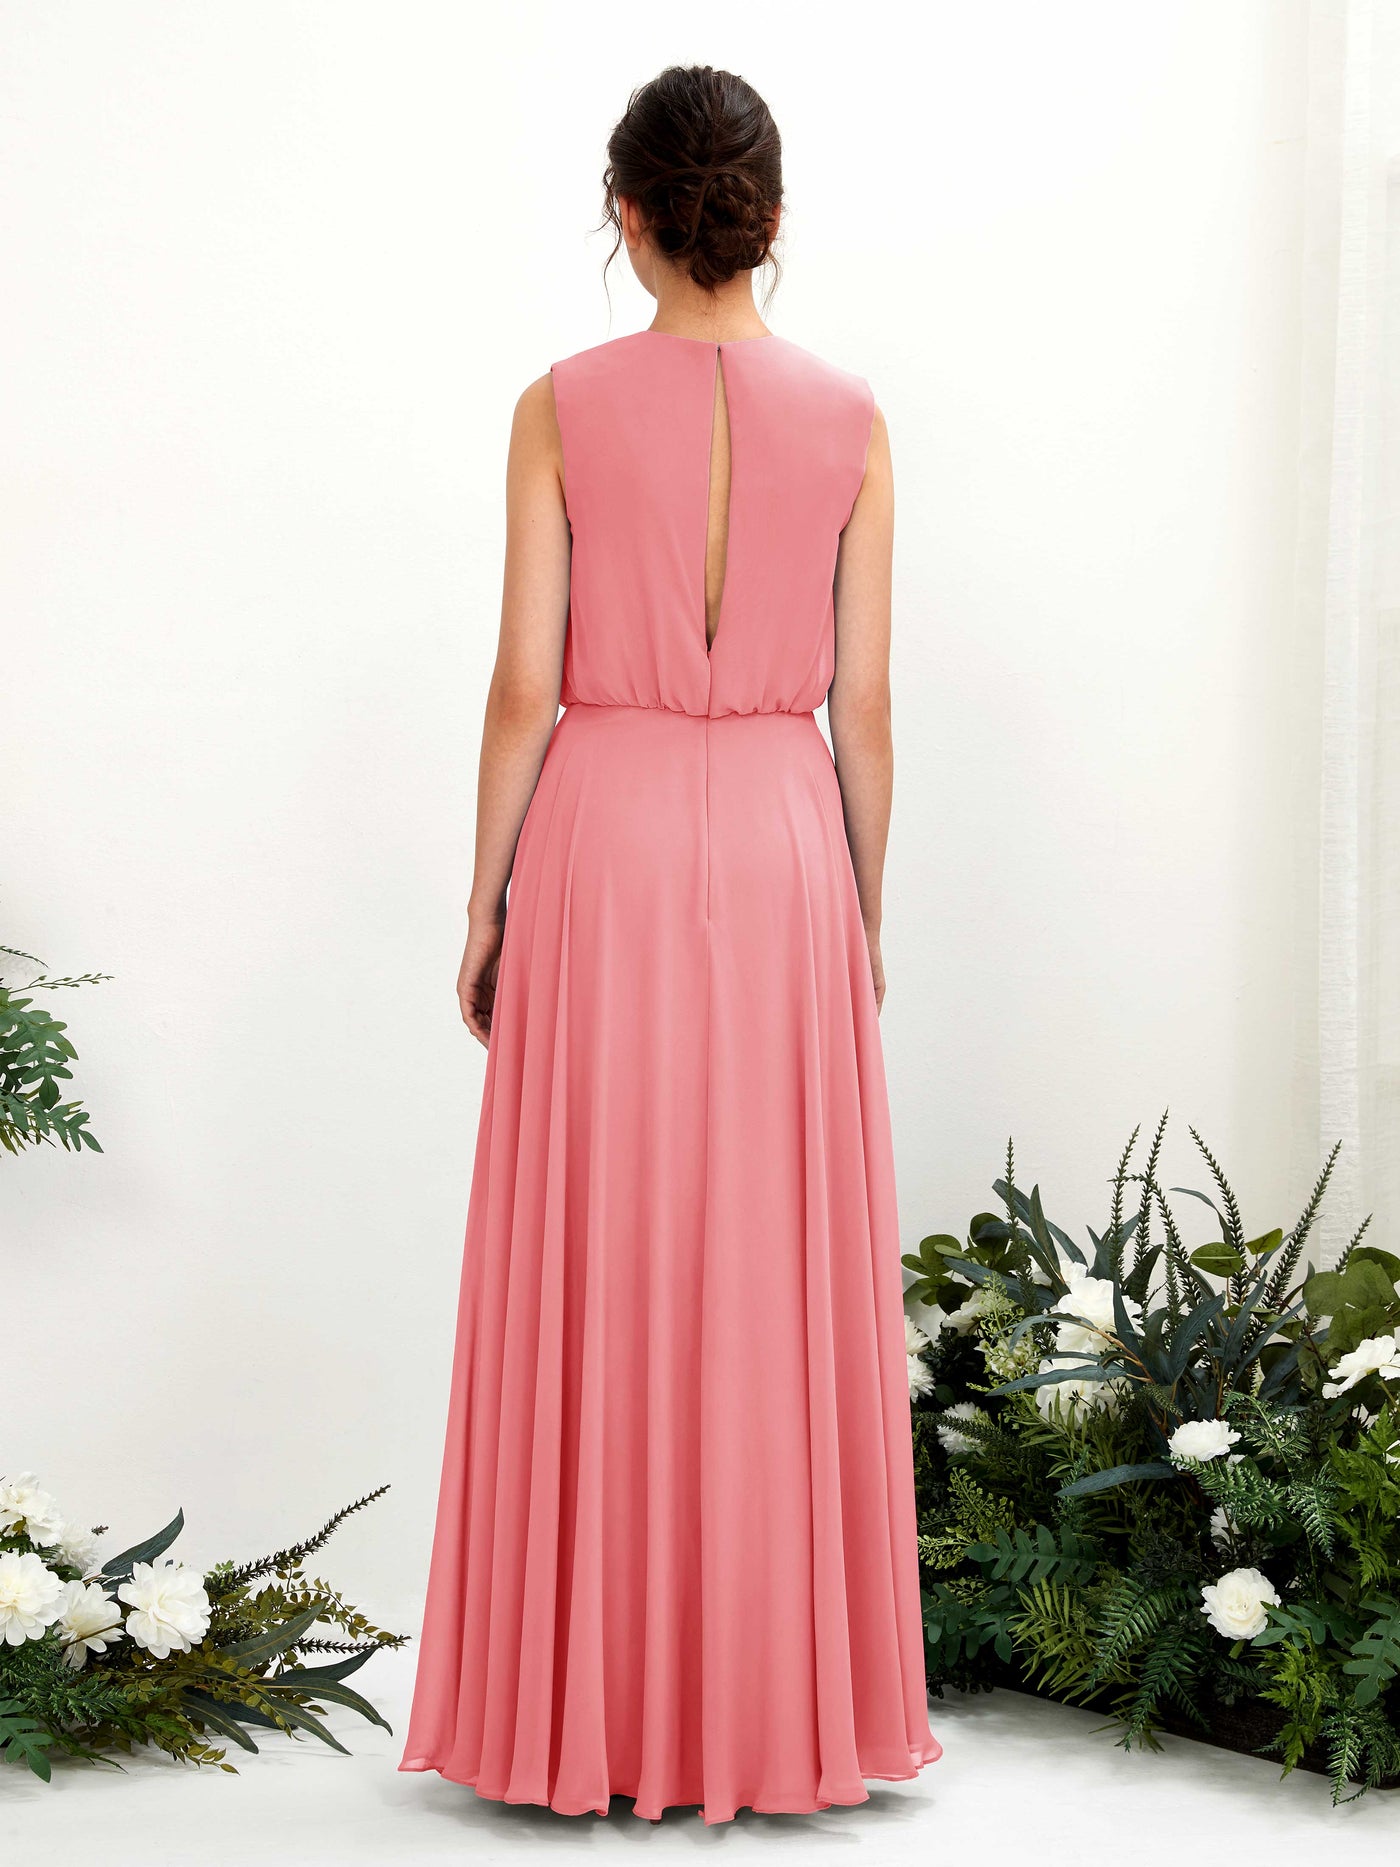 Coral Pink Bridesmaid Dresses Bridesmaid Dress A-line Chiffon Round Full Length Sleeveless Wedding Party Dress (81222830)#color_coral-pink